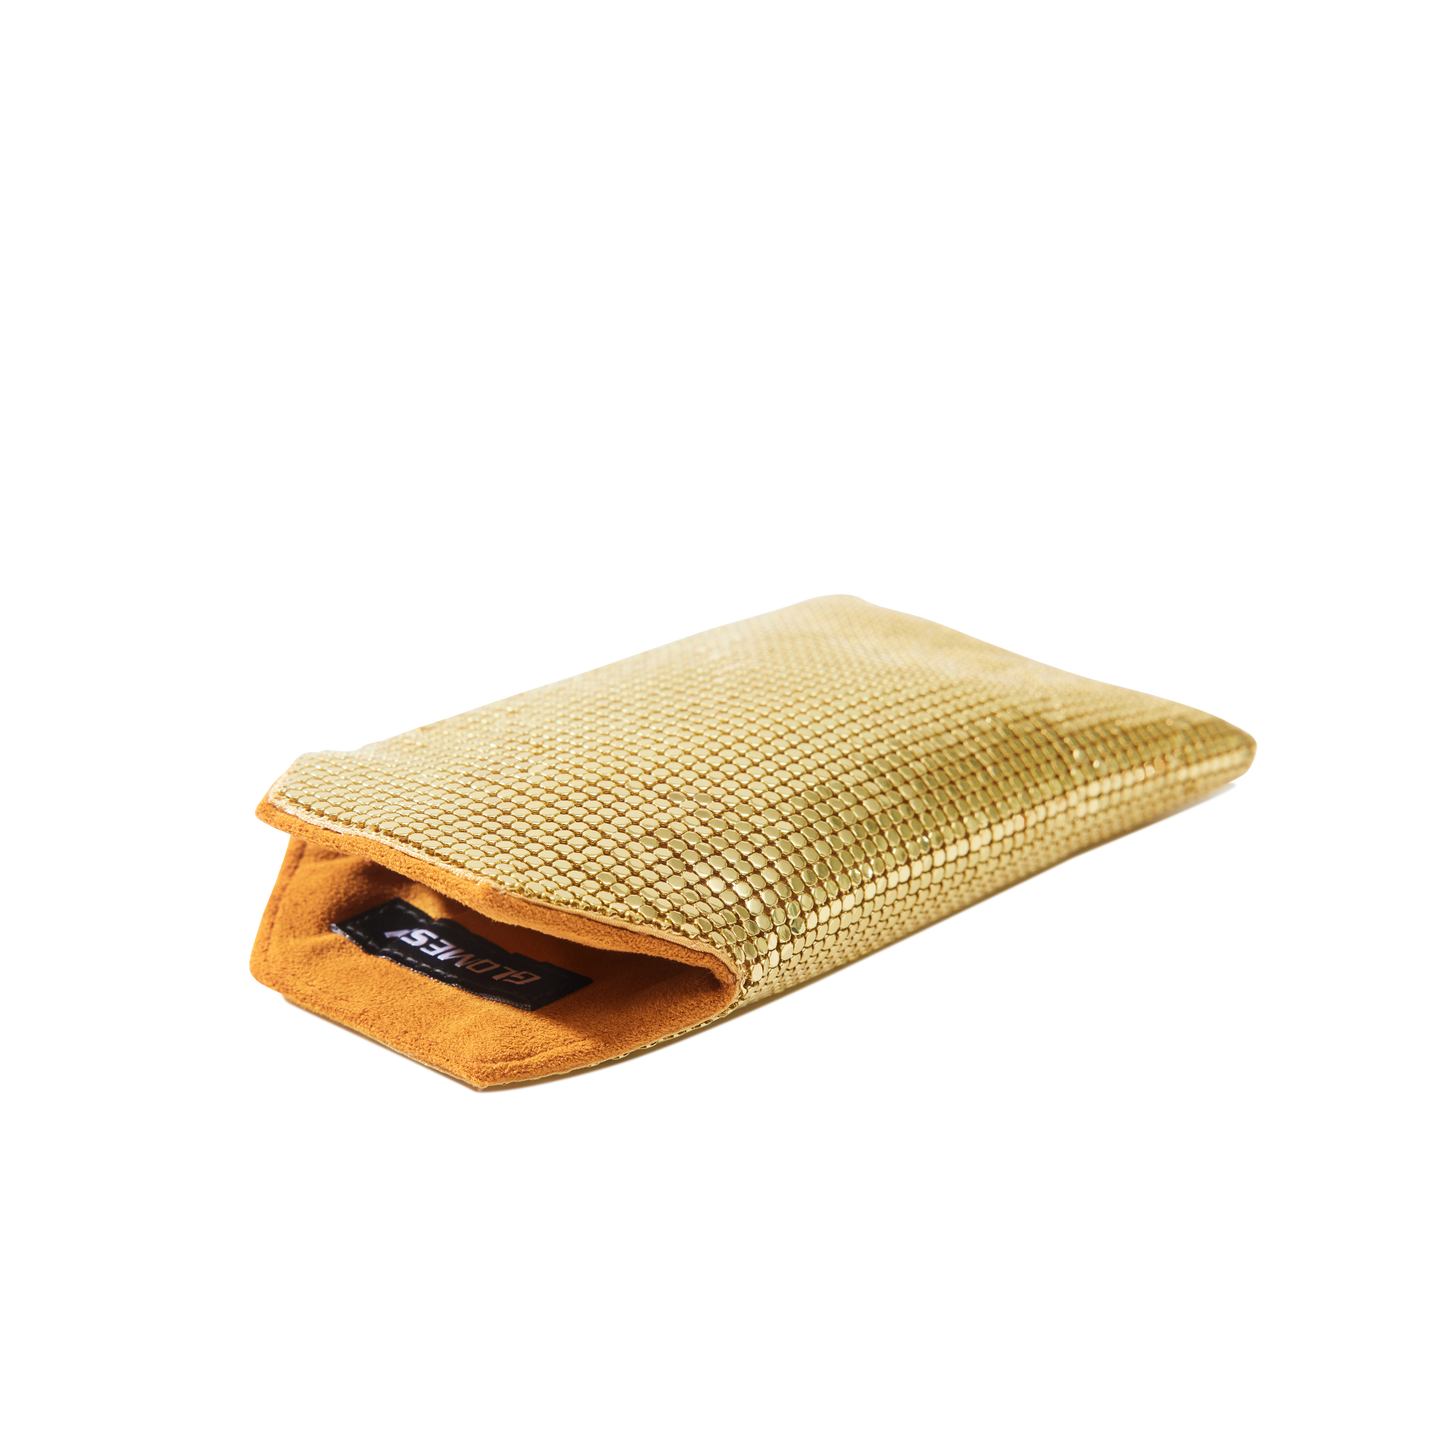 SUNSPEC GLAM CASE - RE-ISSUE ITEM No. #78 - Gold / Toffee Faux Suede Lining